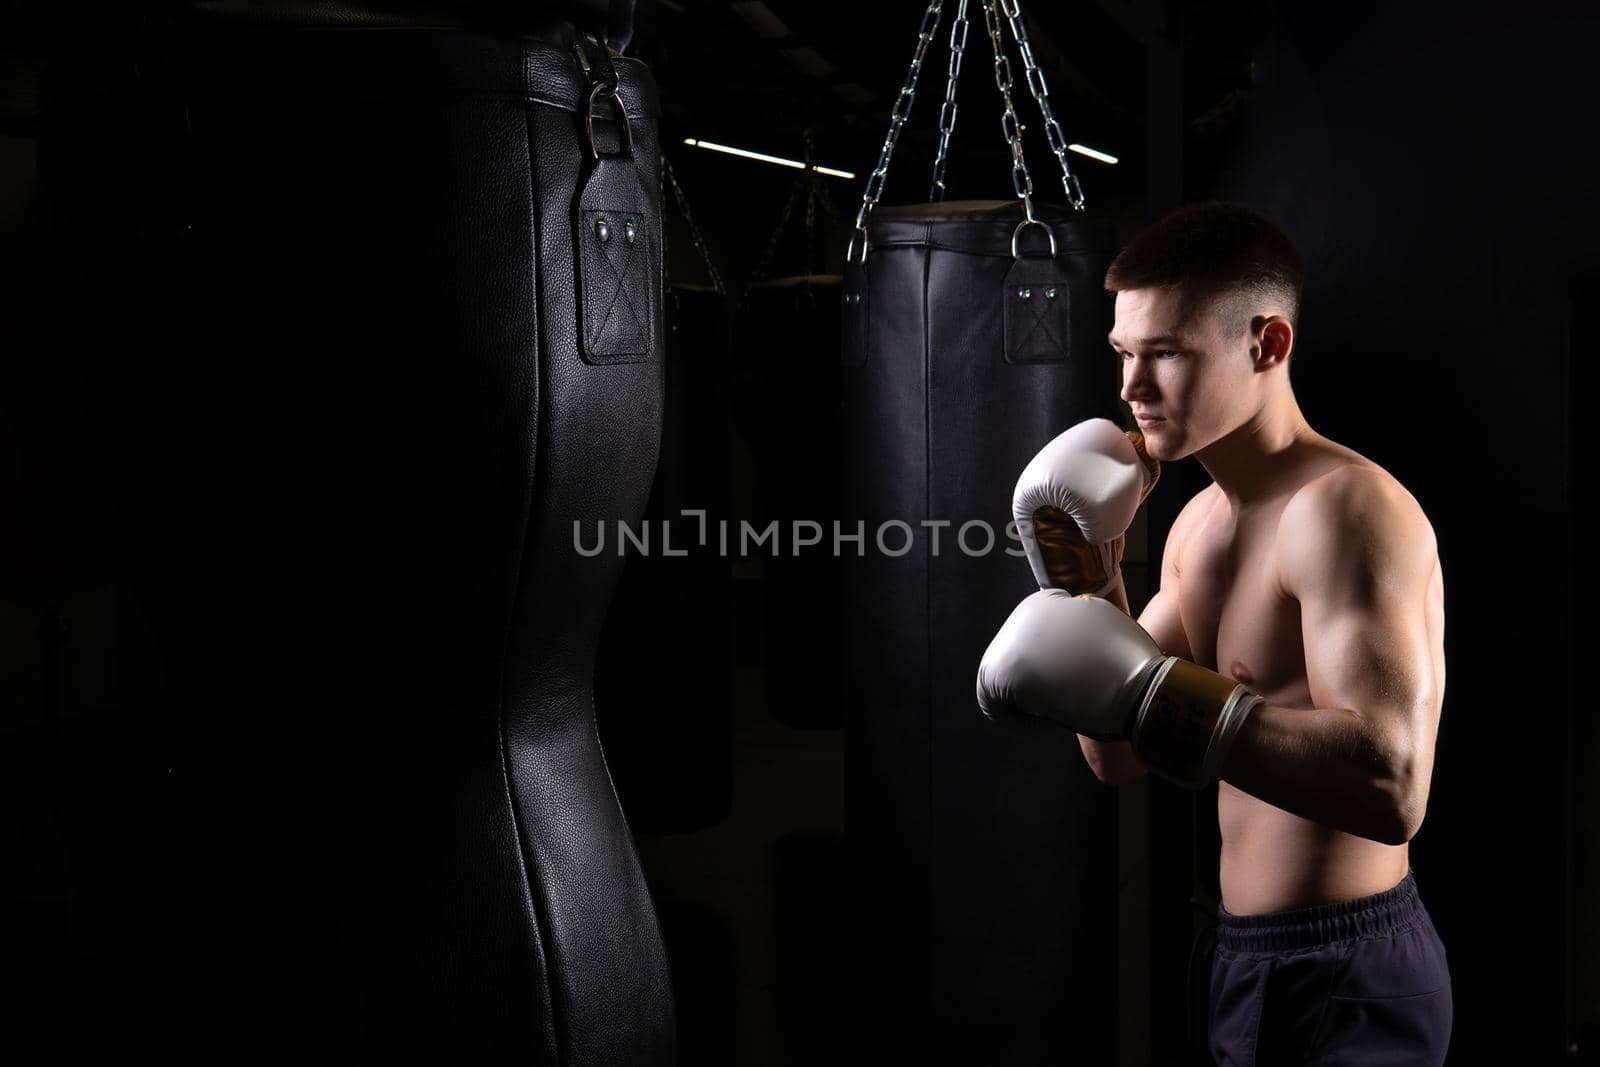 The blows practices bag boxer athlete the glove black young professional body, from strength muscle in punch from exercise lifestyle, sportswear sweat. Backlit model people, one